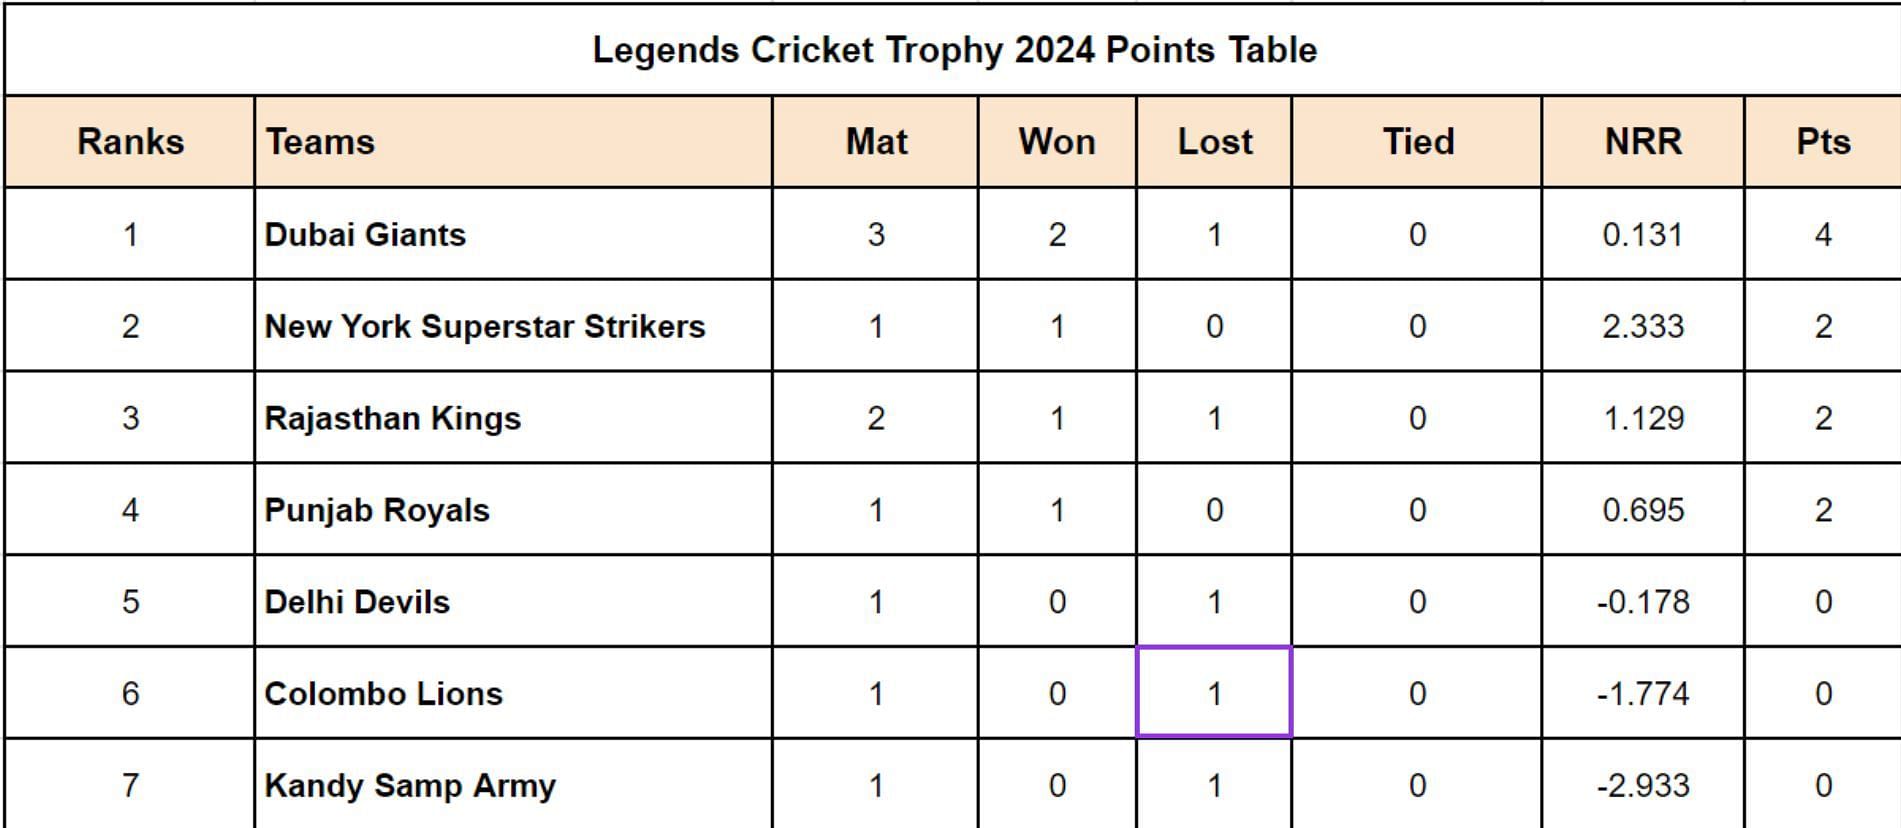 Legends Cricket Trophy 2024 Points Table Updated after Match 5